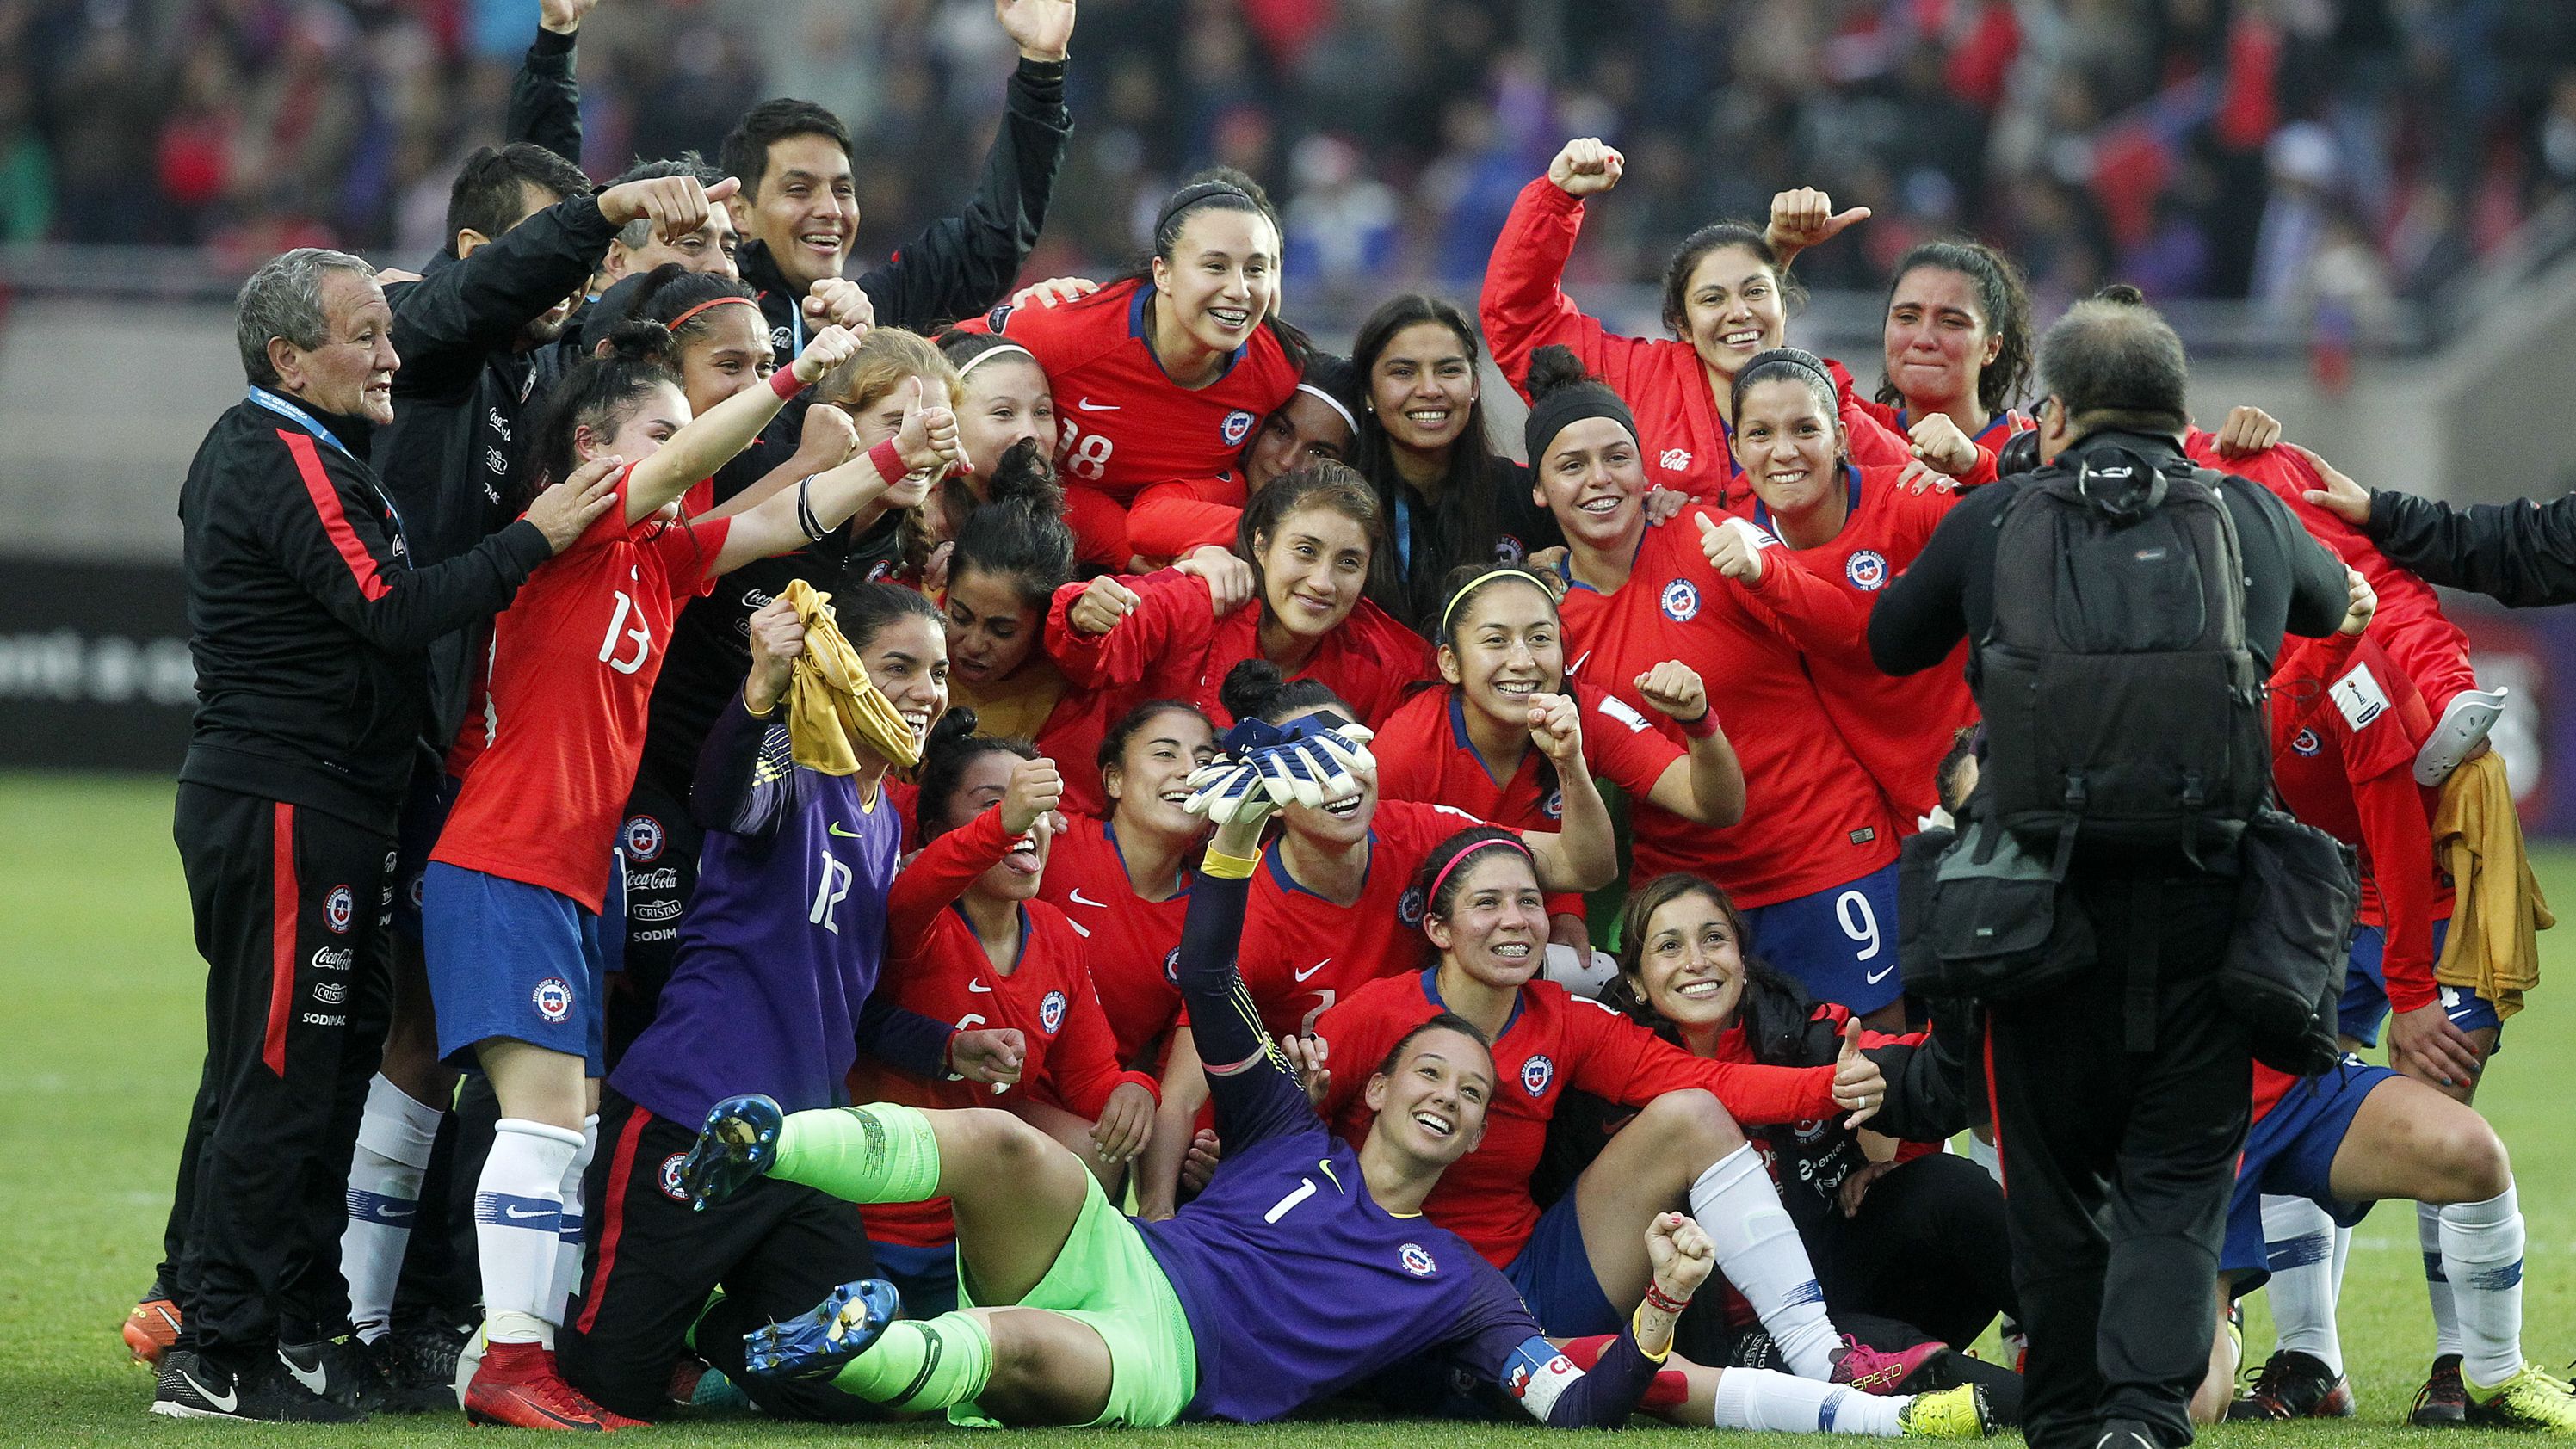 Chile celebrates qualification to its first ever Women's World Cup.